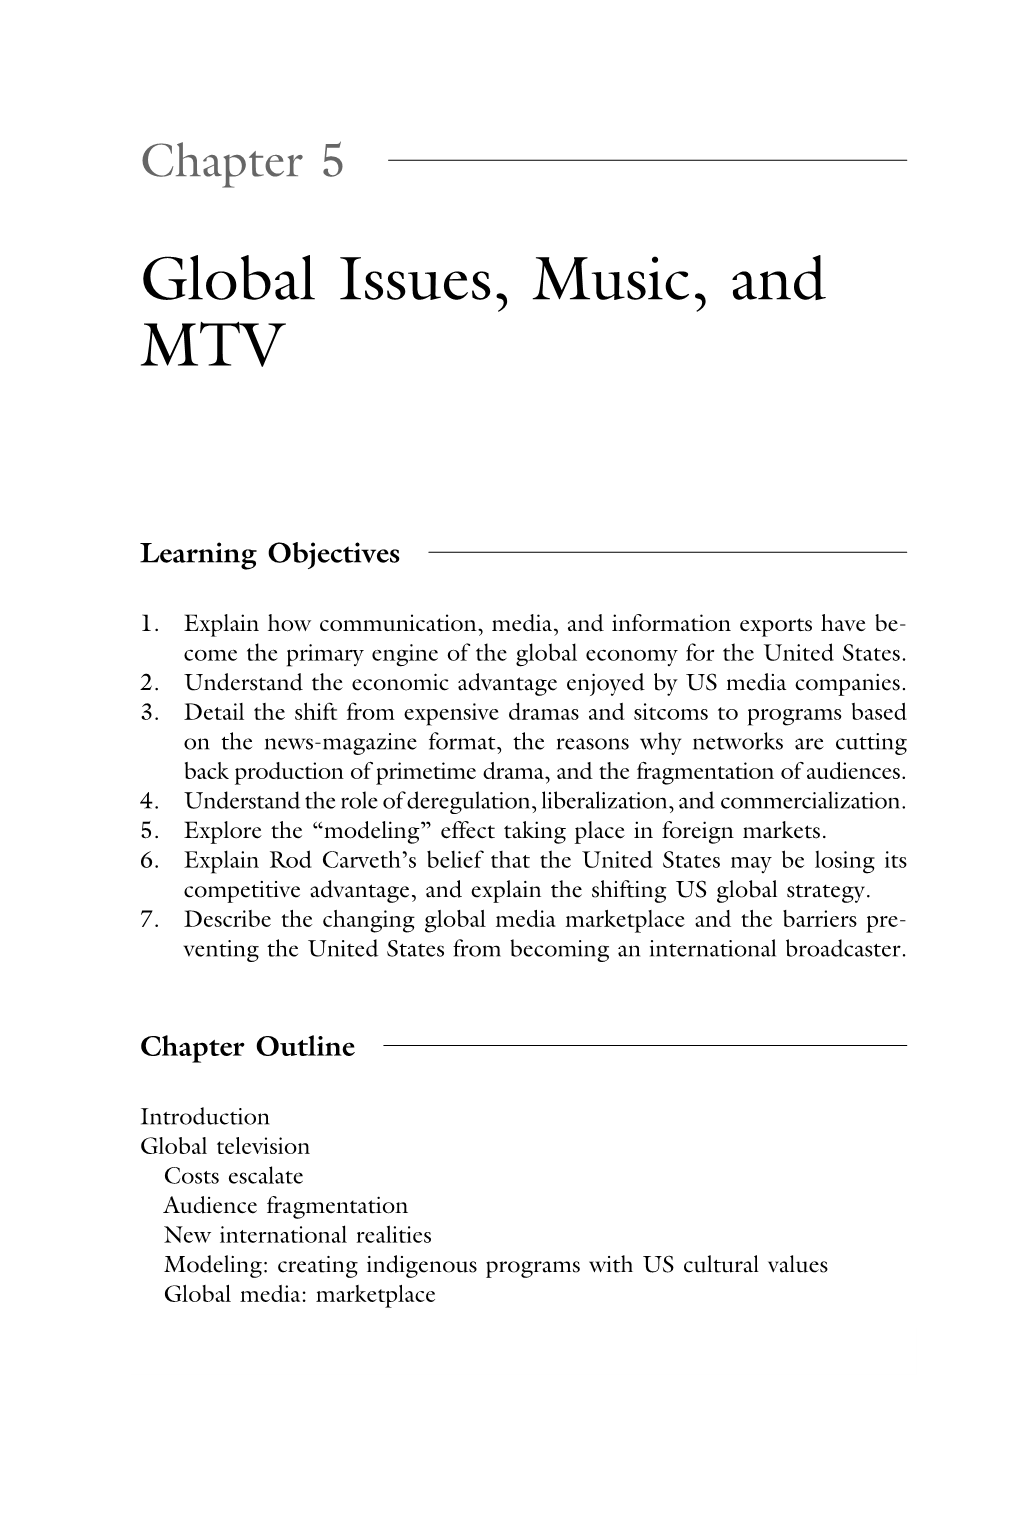 Global Issues, Music, and MTV